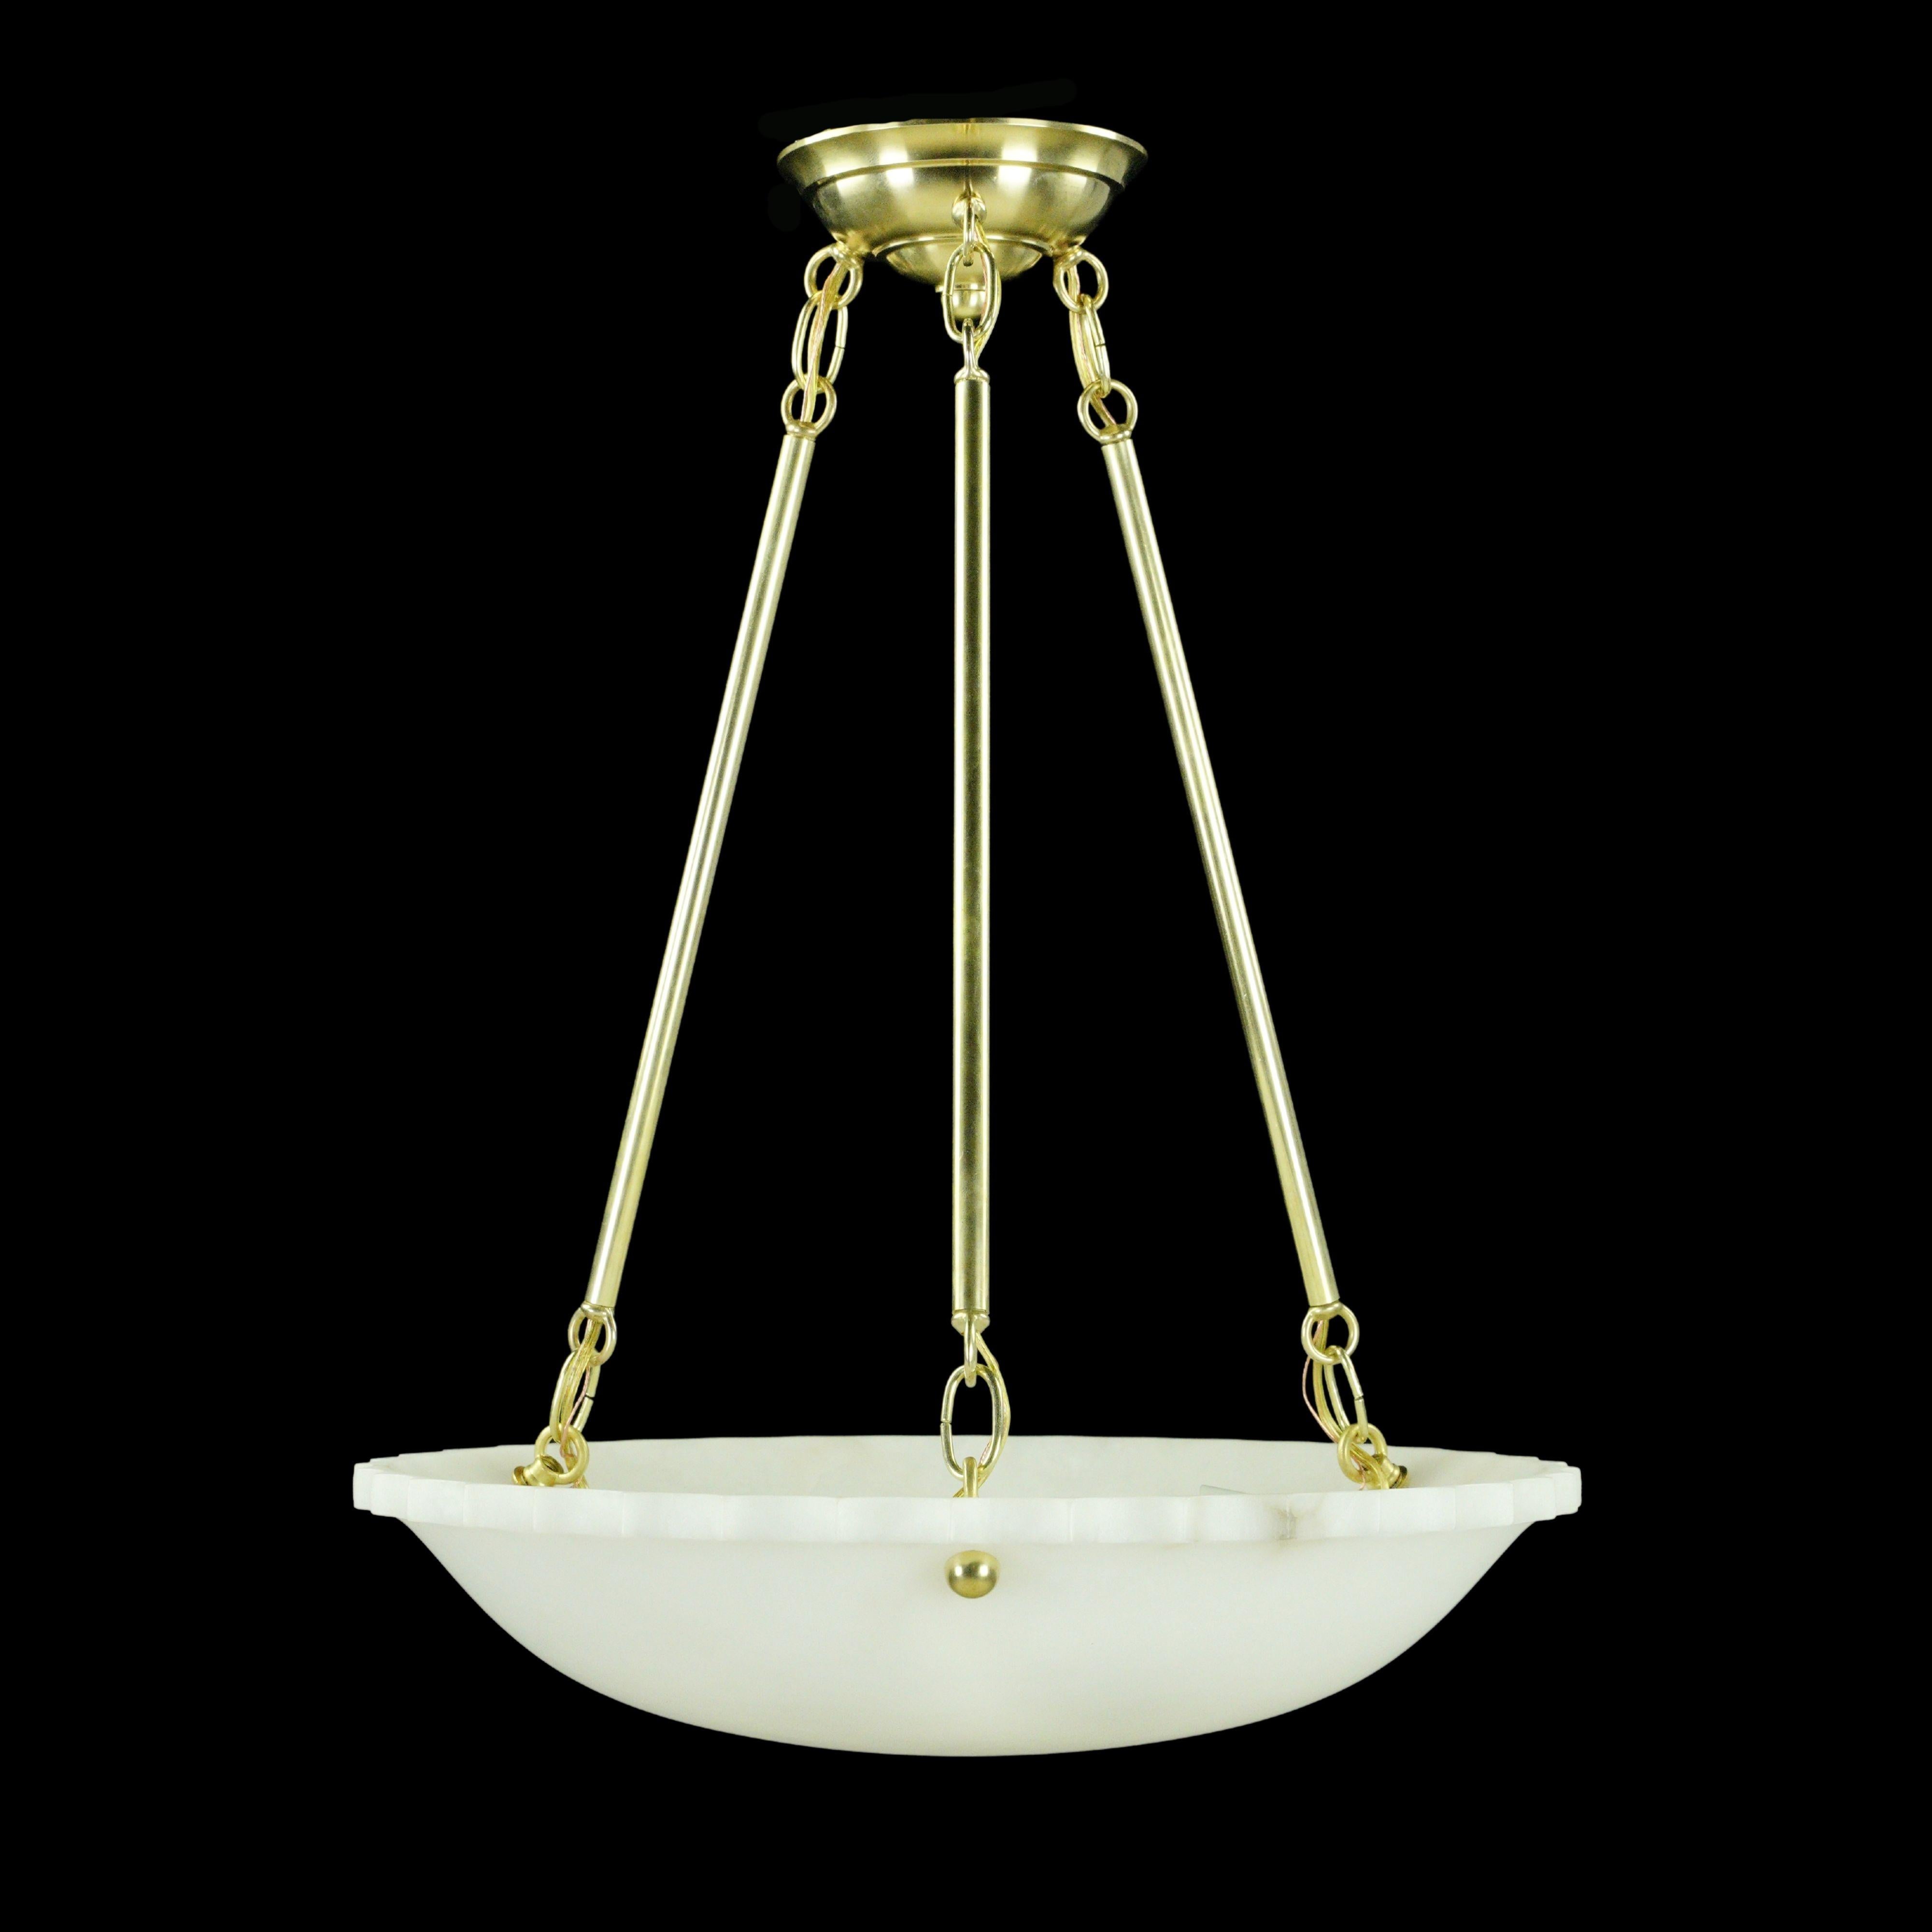 Brass triple arm hardware holds this white carved alabaster bowl dish light. This light is wired and ready to ship. Good condition with appropriate wear from age. New hardware. One available. Cleaned and restored. Please note, this item is located